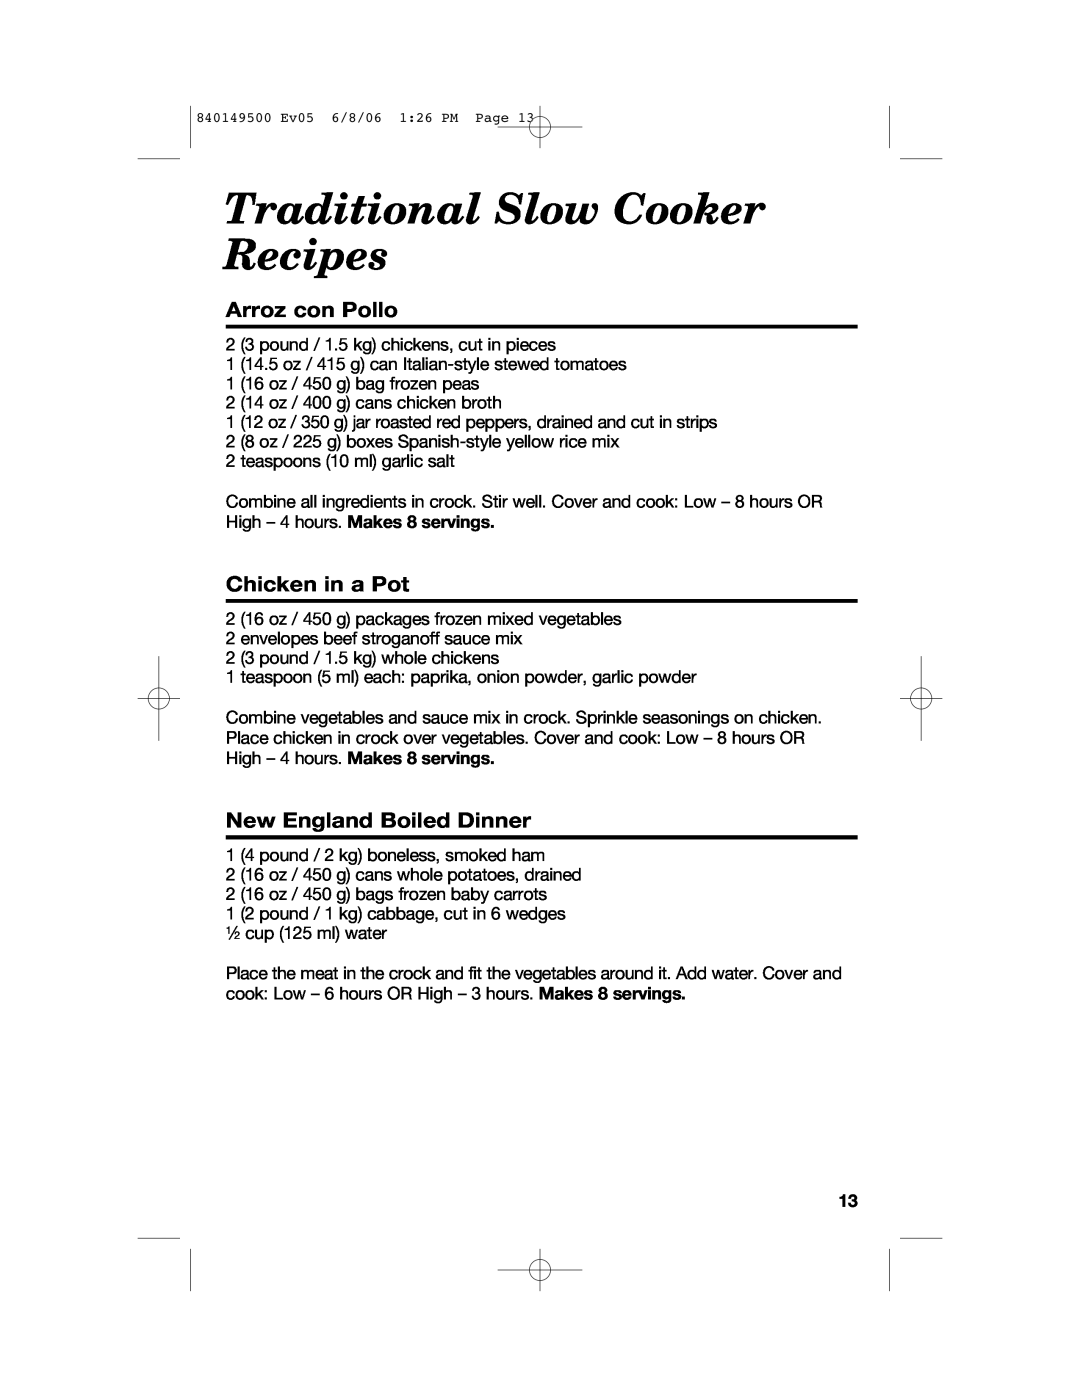 Proctor-Silex 840149500 Traditional Slow Cooker Recipes, Arroz con Pollo, Chicken in a Pot, New England Boiled Dinner 